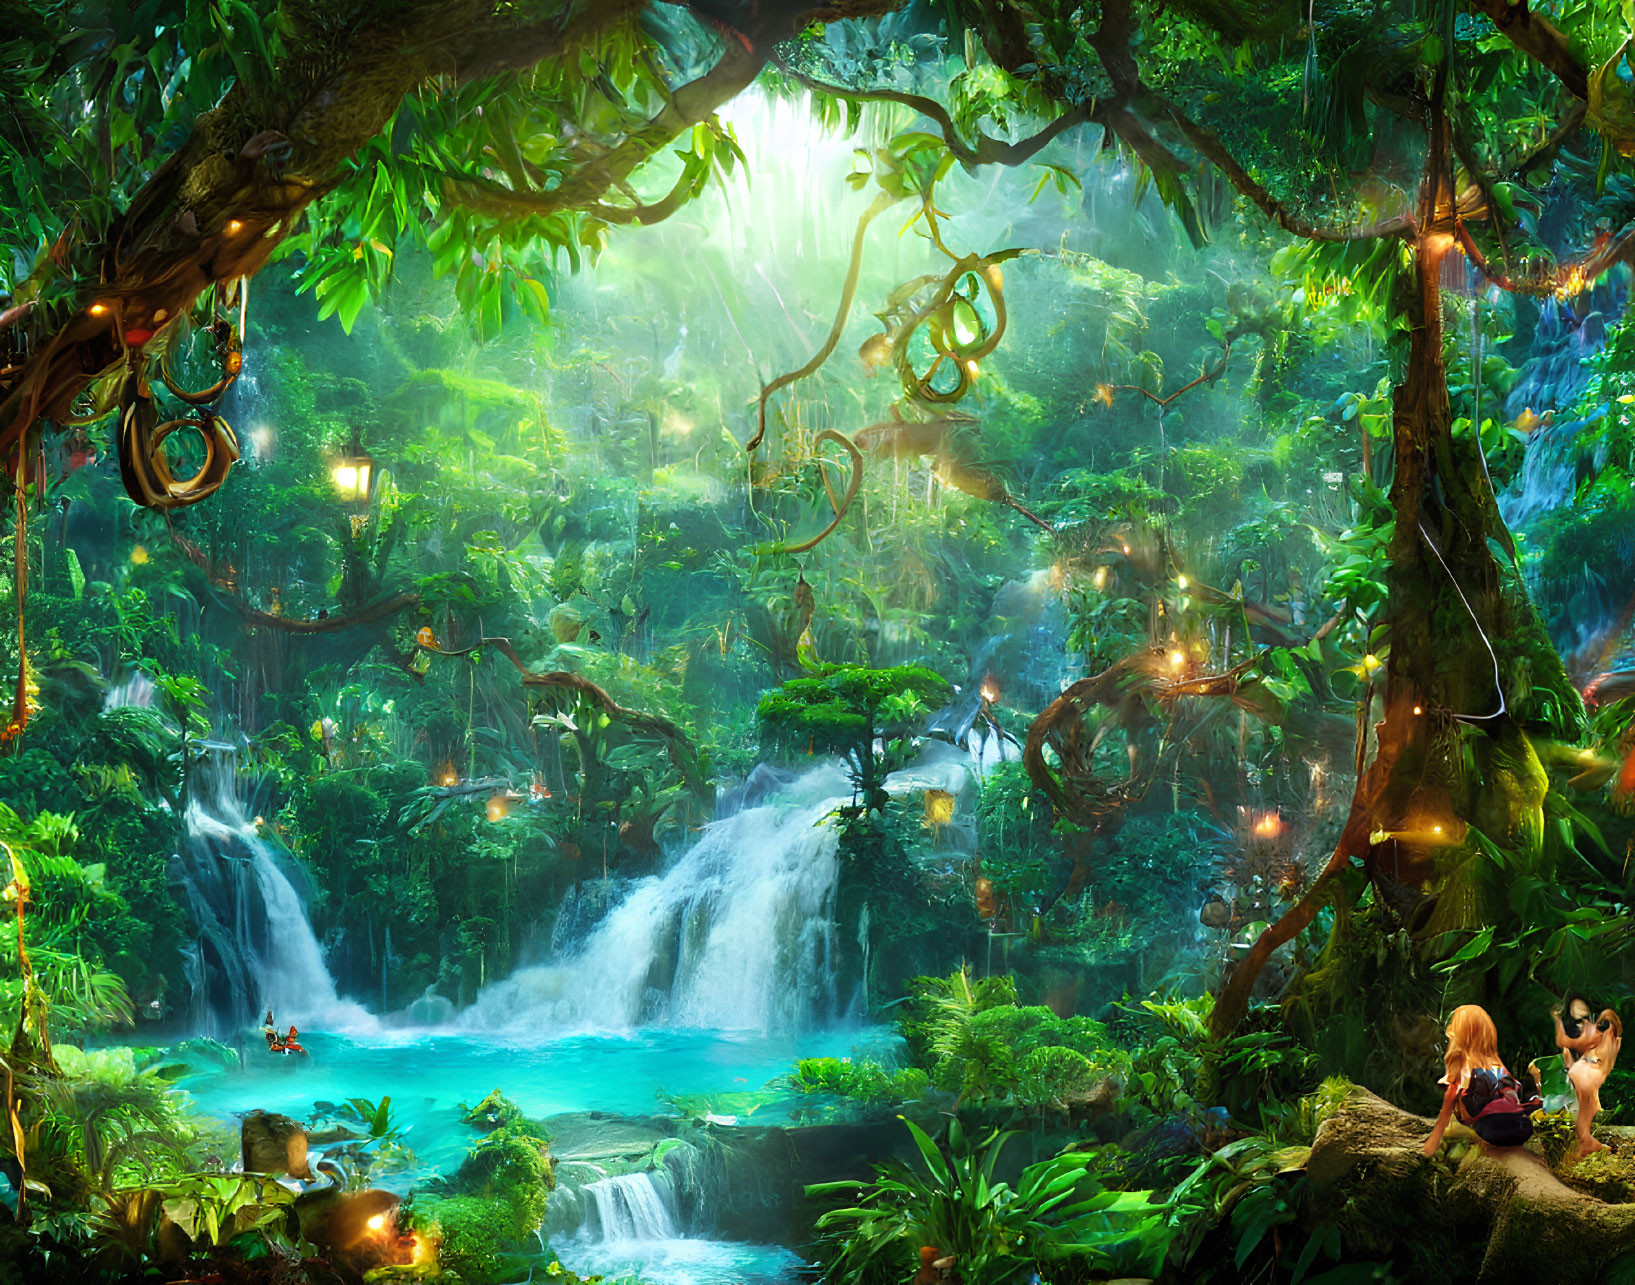 Enchanted forest with waterfall, luminescent plants, characters, boat in lagoon